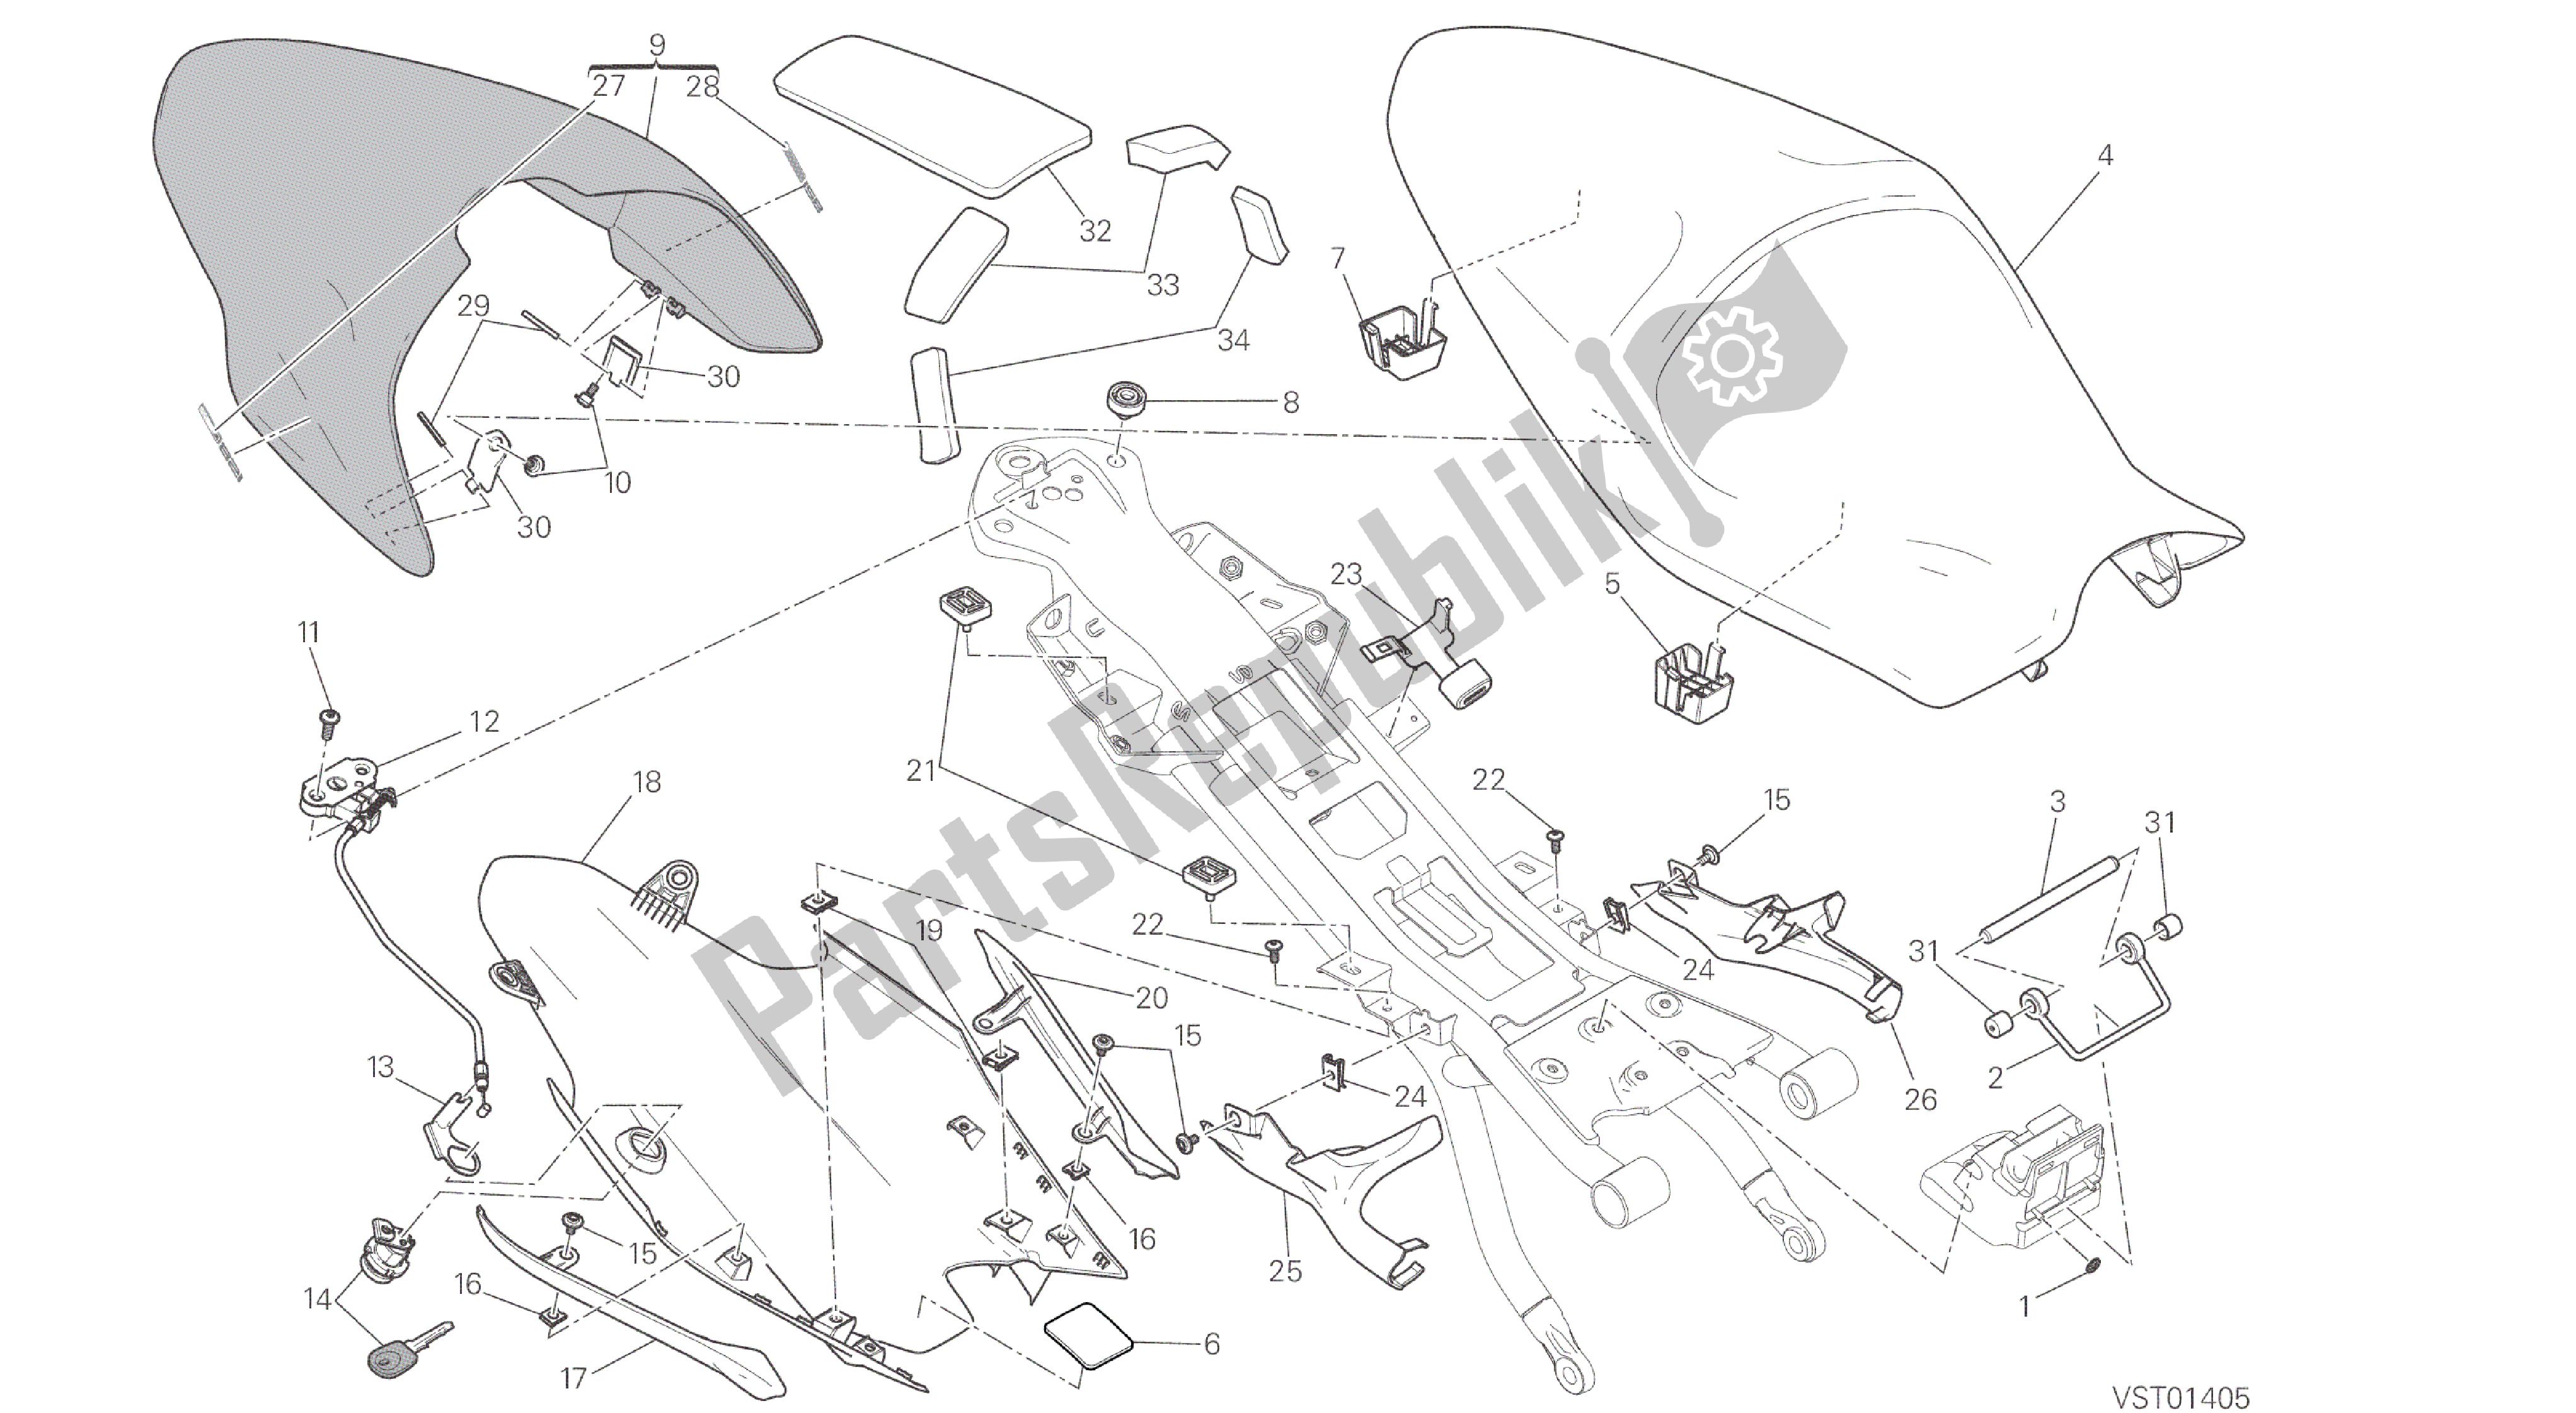 All parts for the Drawing 033 - Seat [mod:m 821]group Frame of the Ducati Monster 821 2014